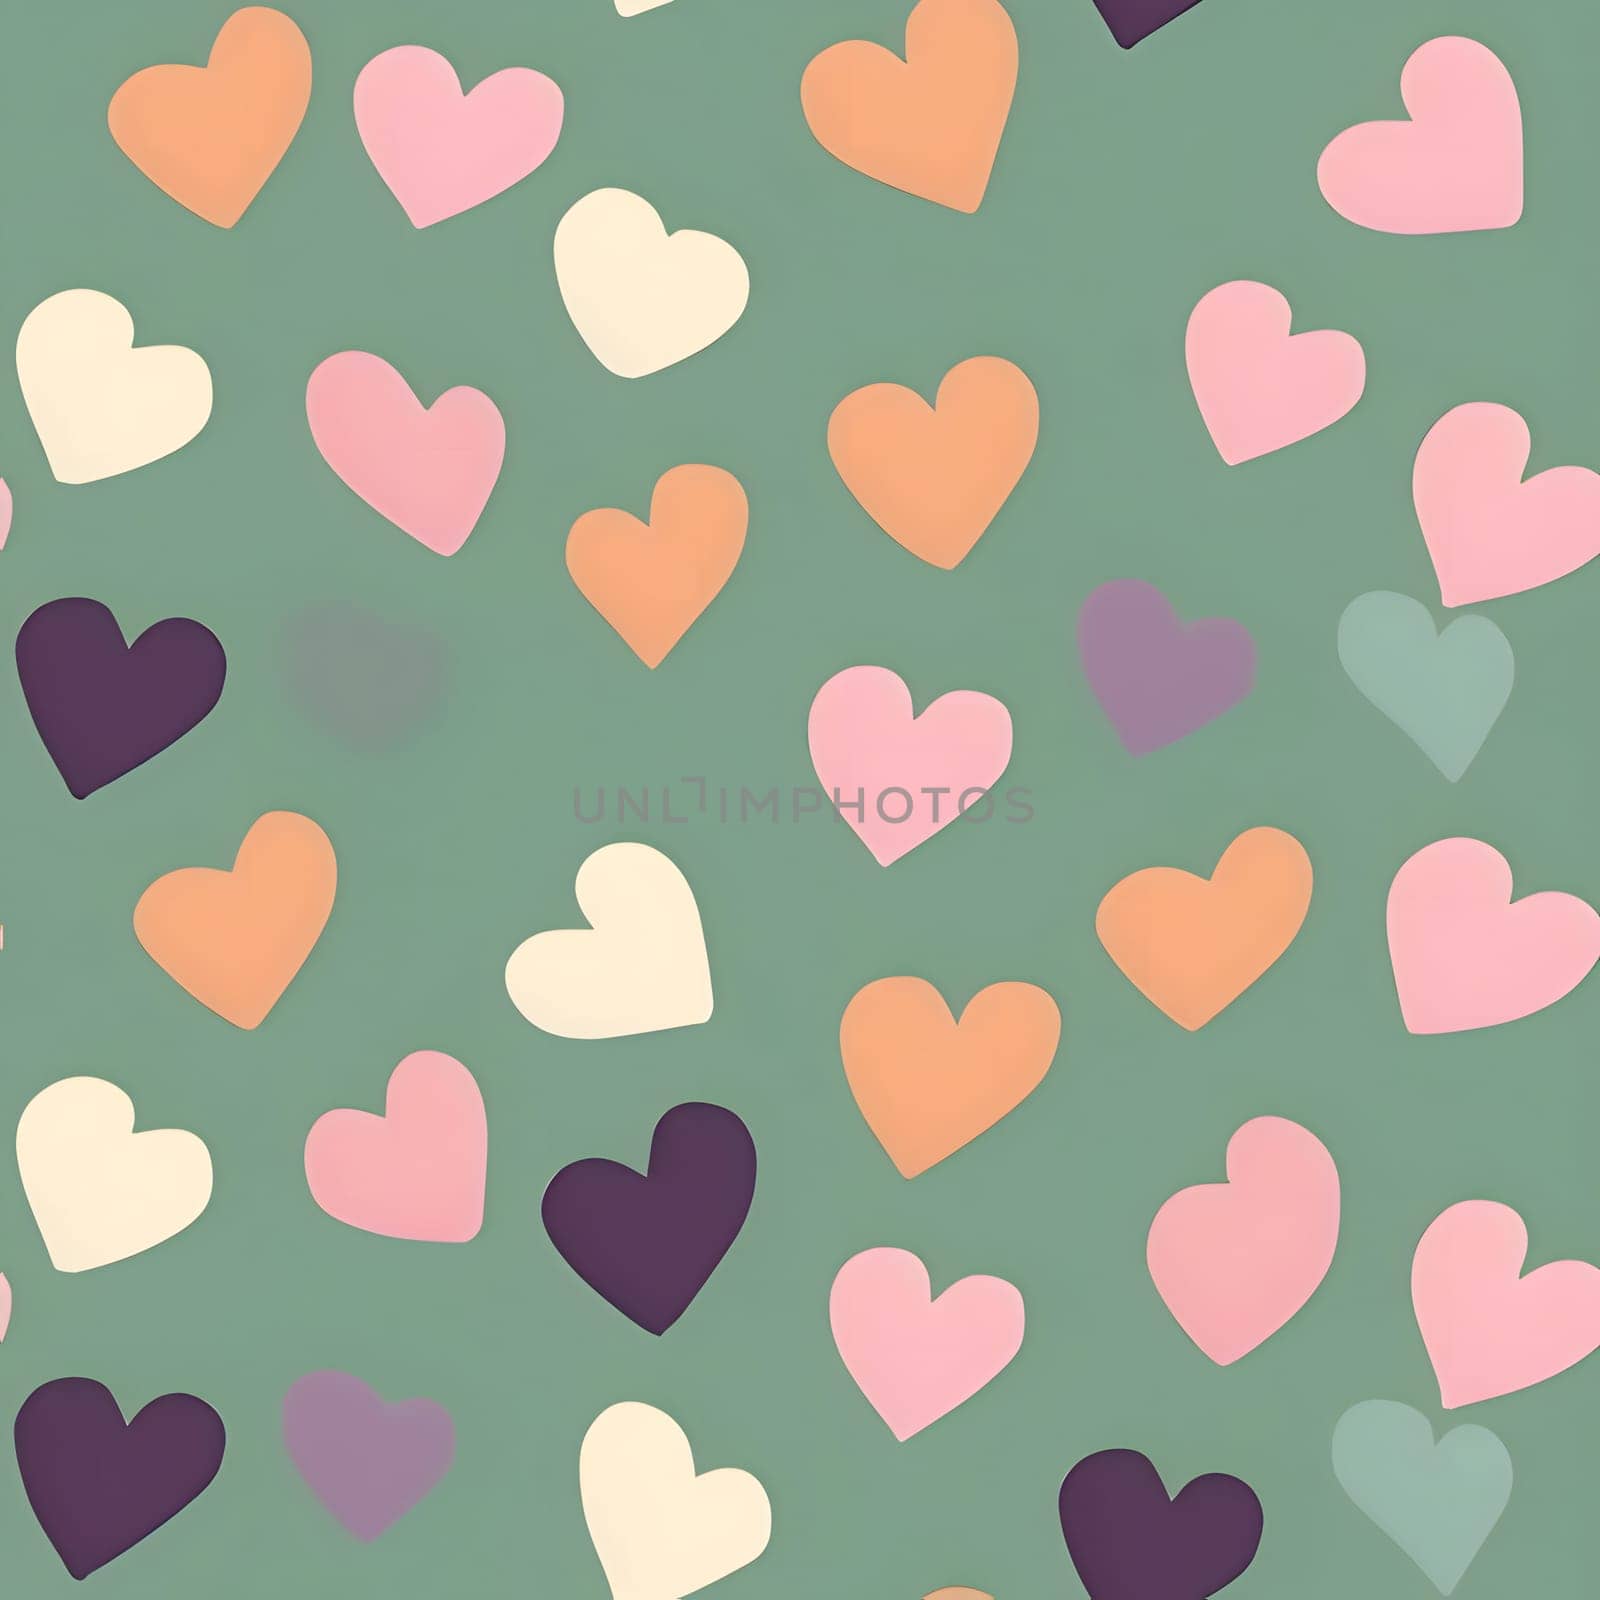 Patterns and banners backgrounds: Seamless pattern with hearts. Vector illustration. Eps 10.